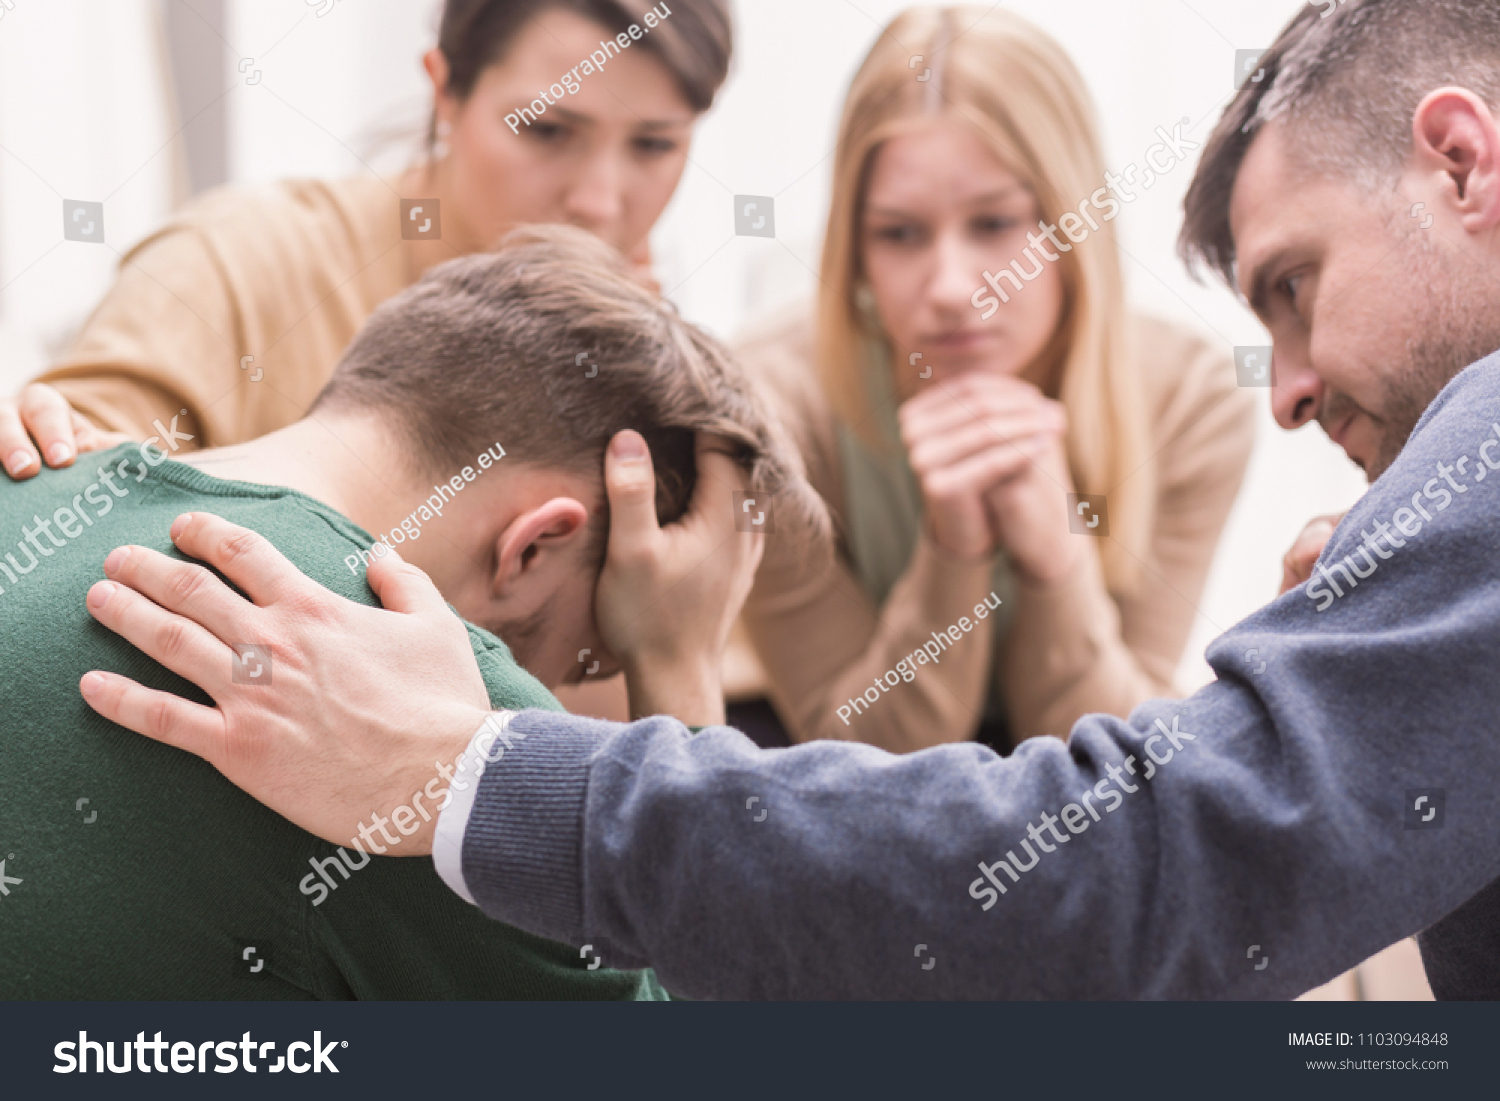 Close-up of a devastated young man holding his head in his hands and friends supporting him during group therapy #1103094848